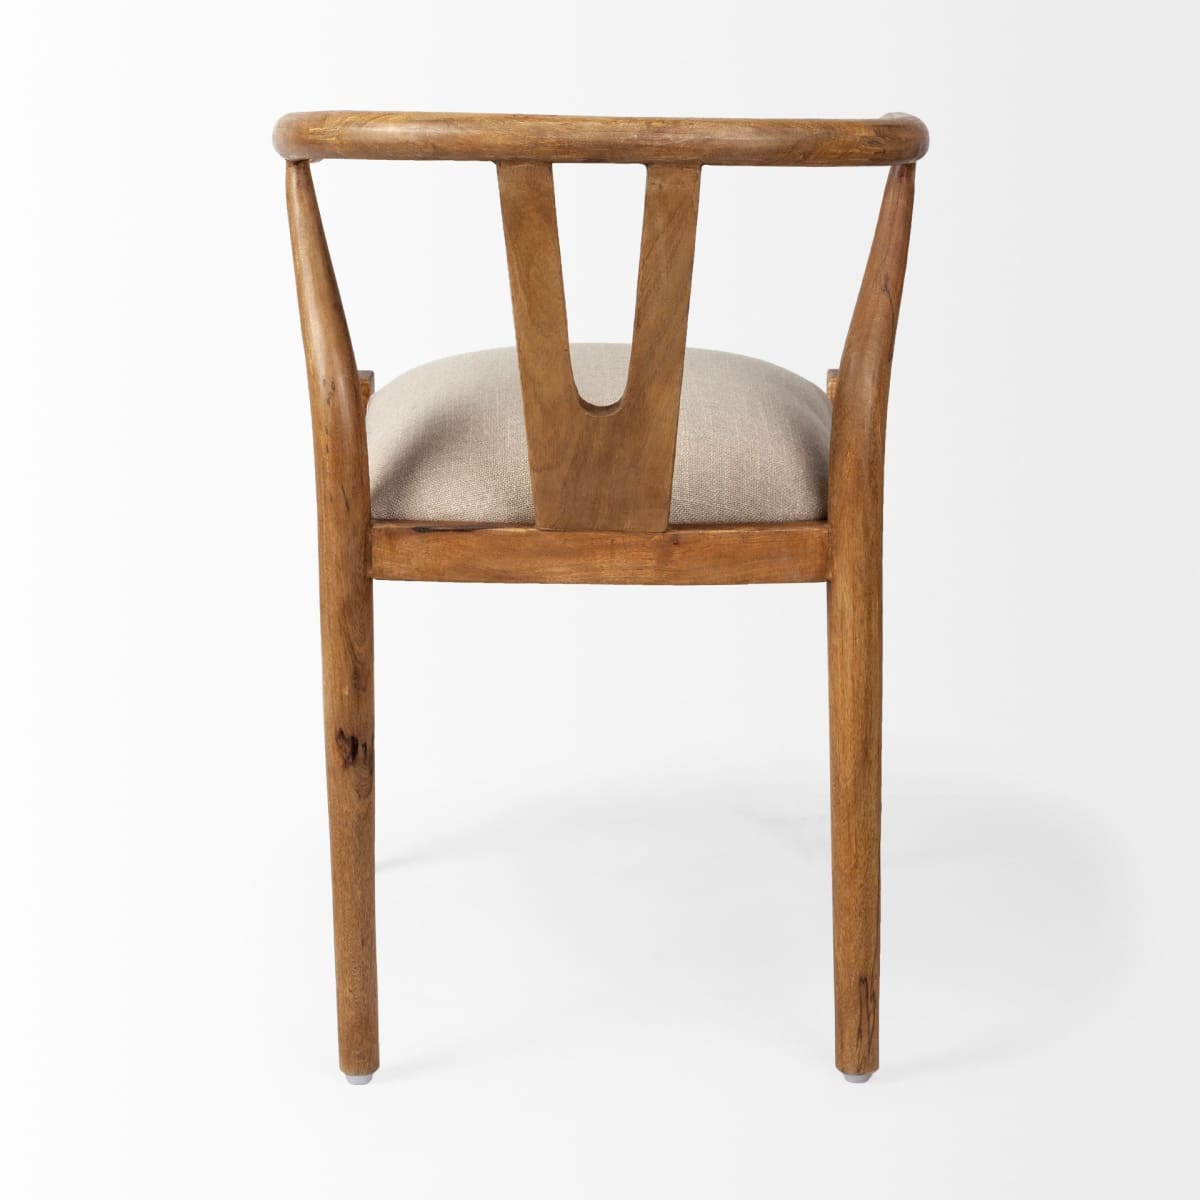 Trixie Dining Chair Cream Fabric | Brown Wood - dining-chairs